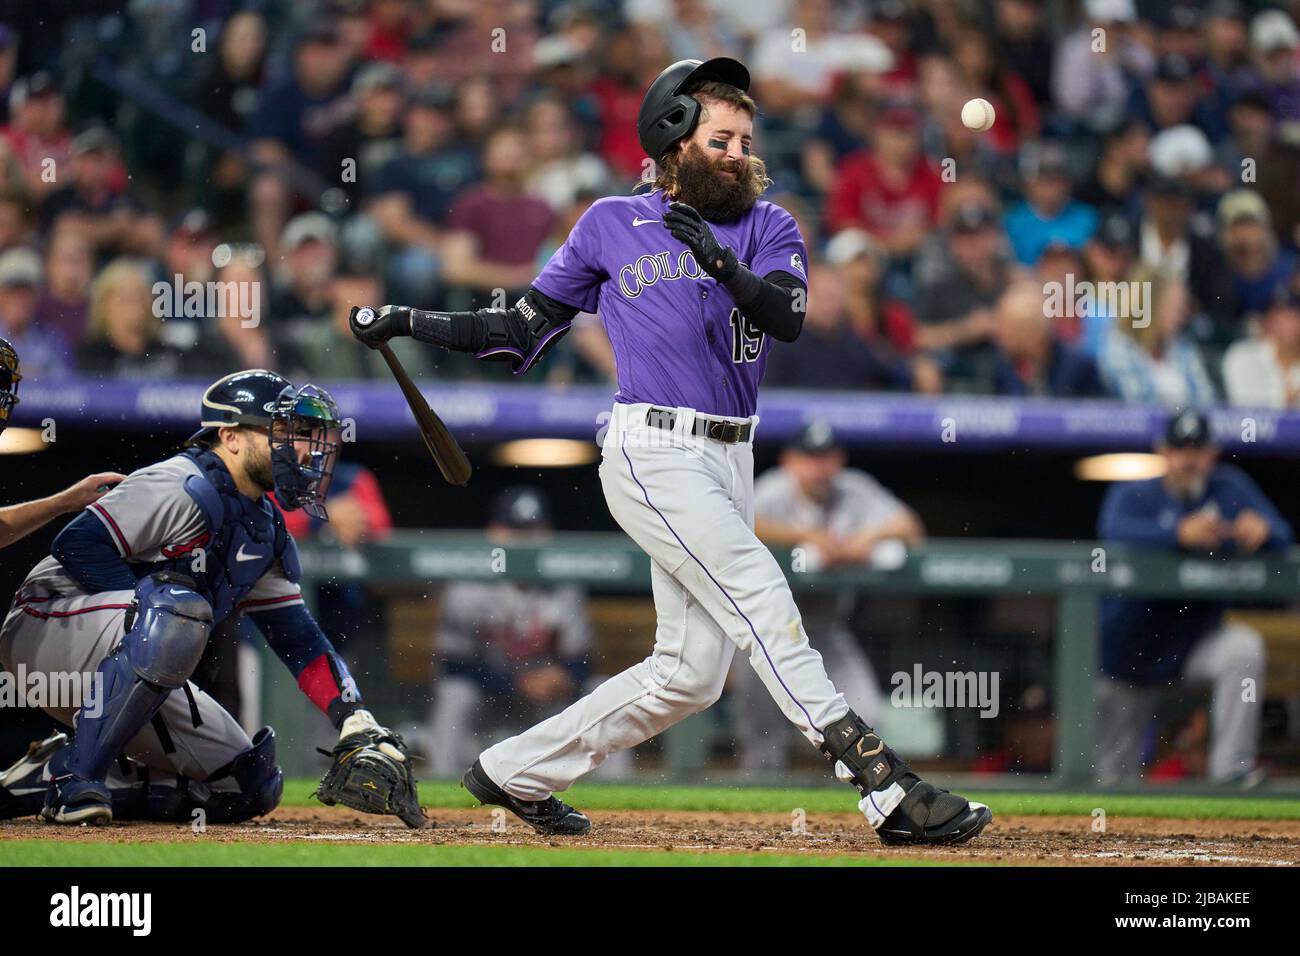 June 3 2022: Colorado designated hitter Charlie Blackmon (19) could ball  hits his helmet and knocks it off during the game with Atlanta Braves and  Colorado Rockies held at Coors Field in